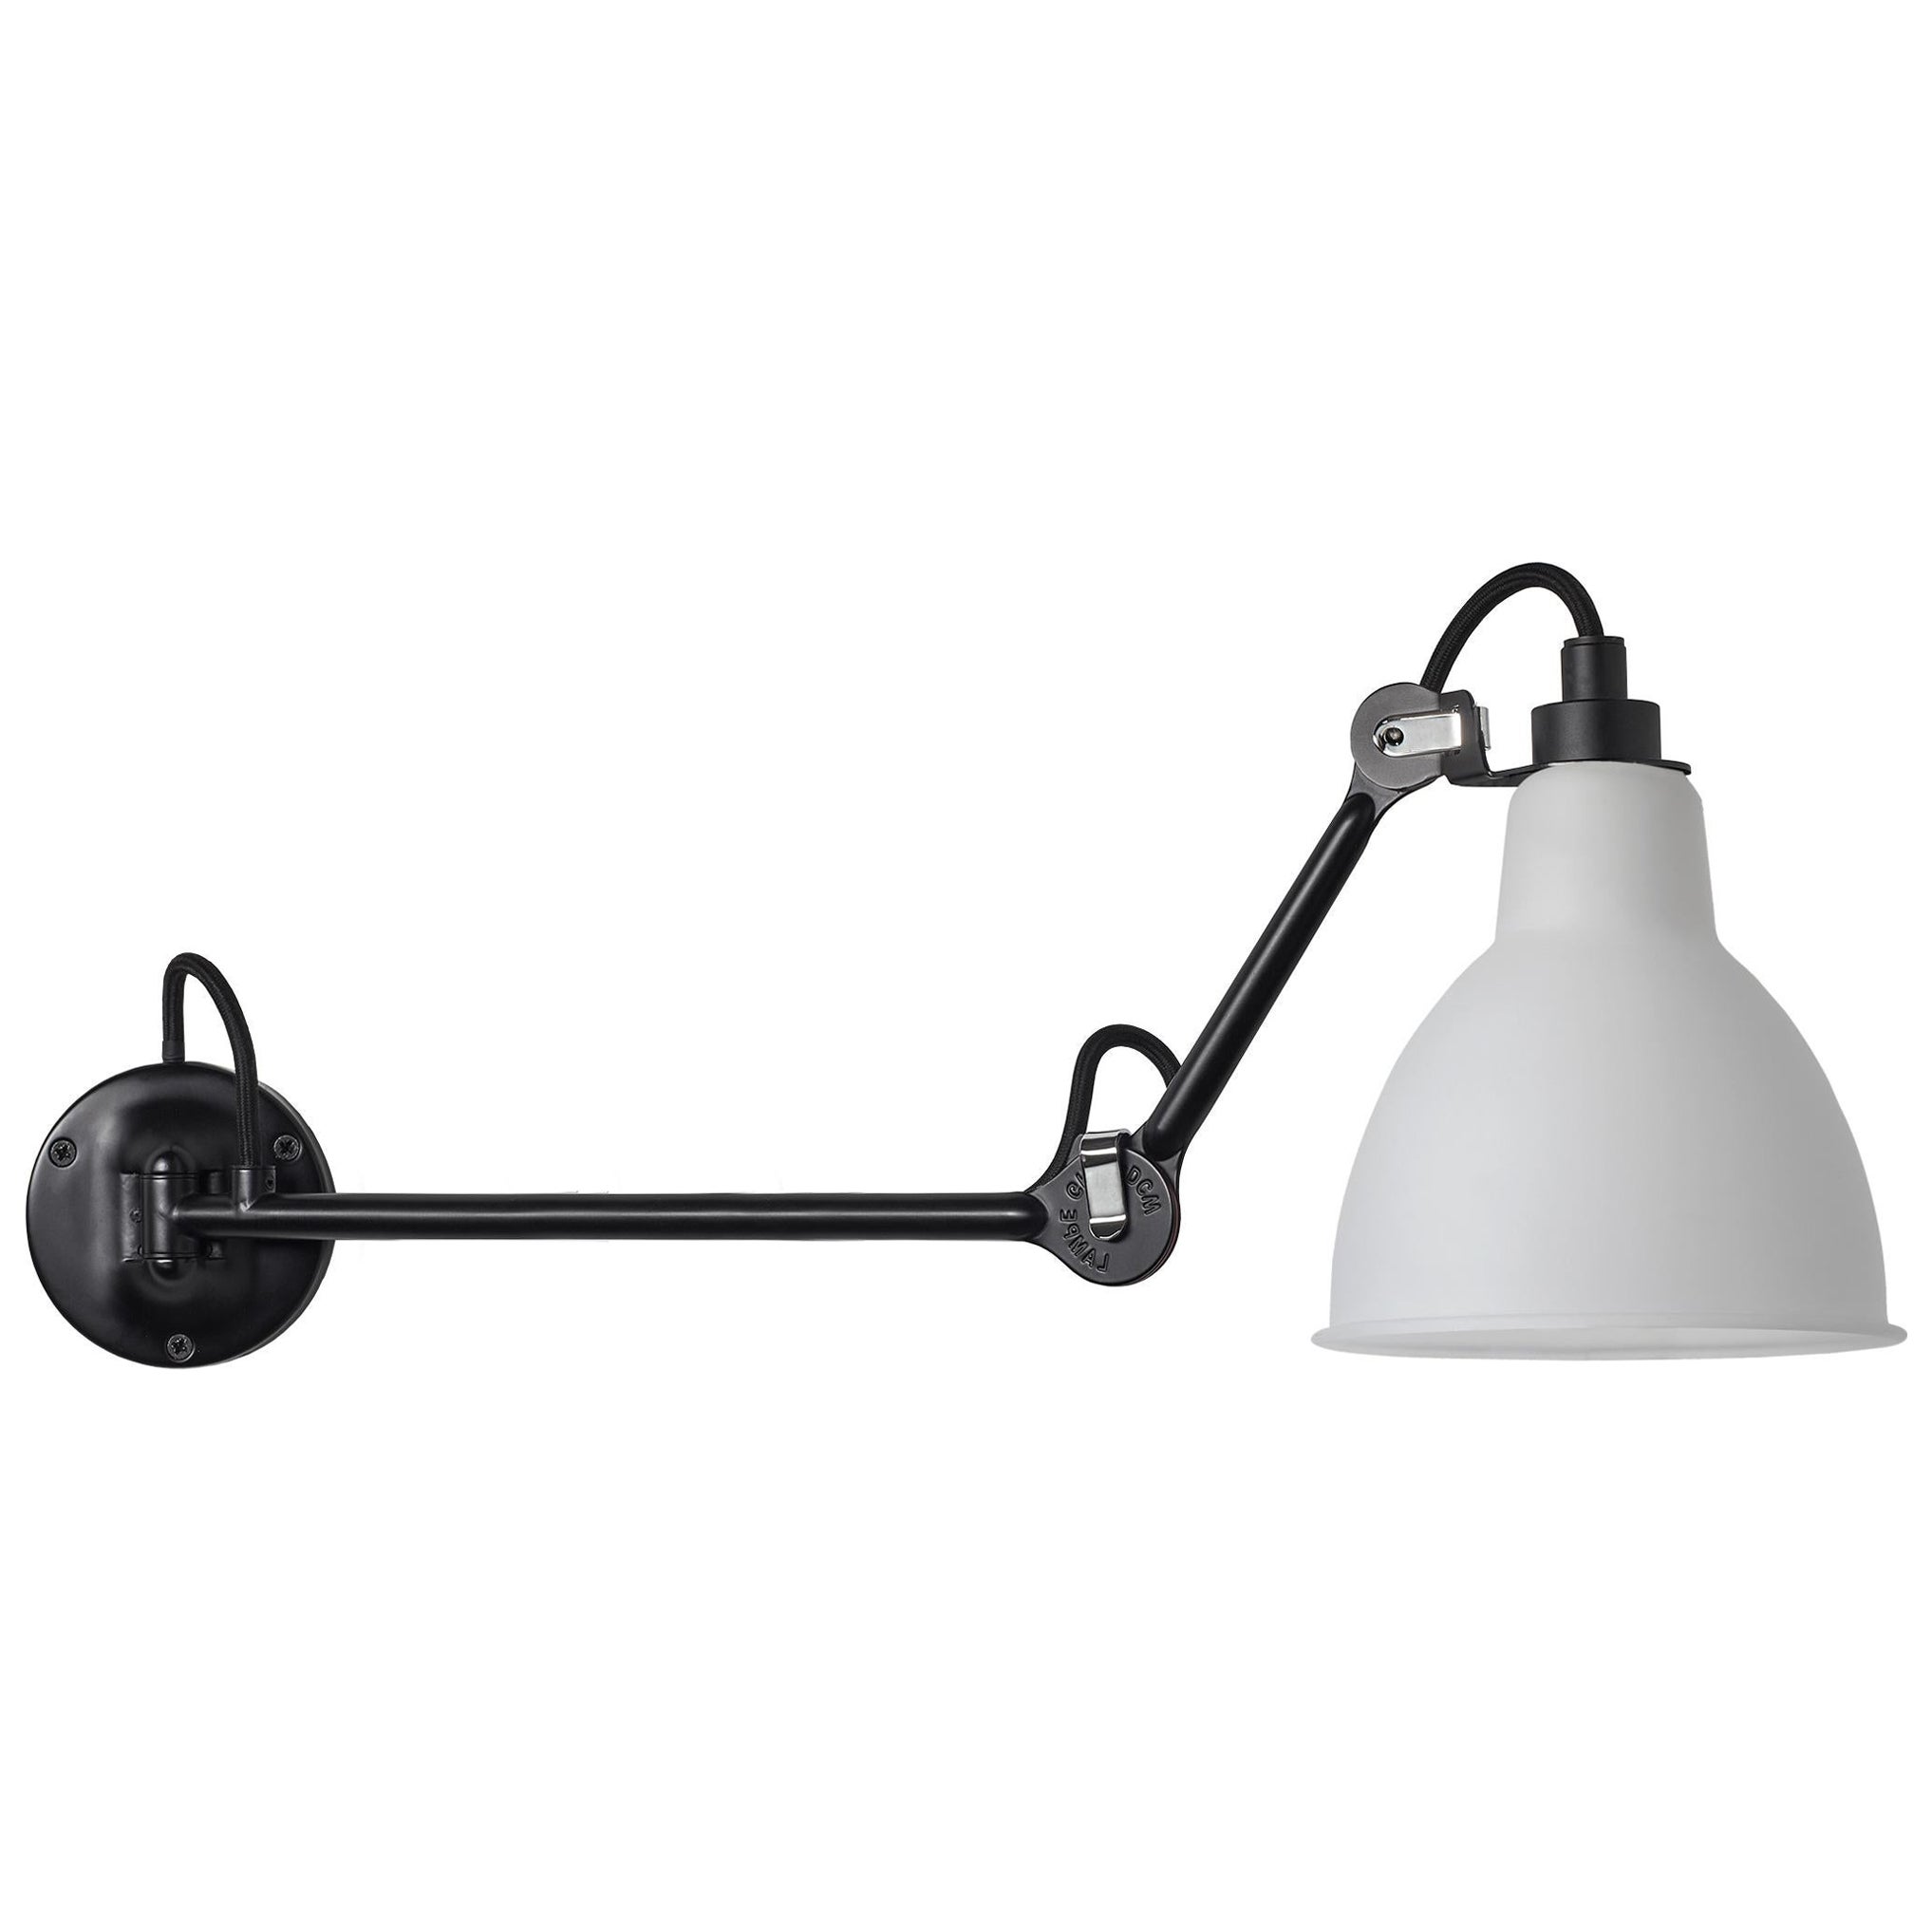 DCW Editions La Lampe Gras N°204 L40 Wall Lamp in Black Arm &Polycarbonate Shade